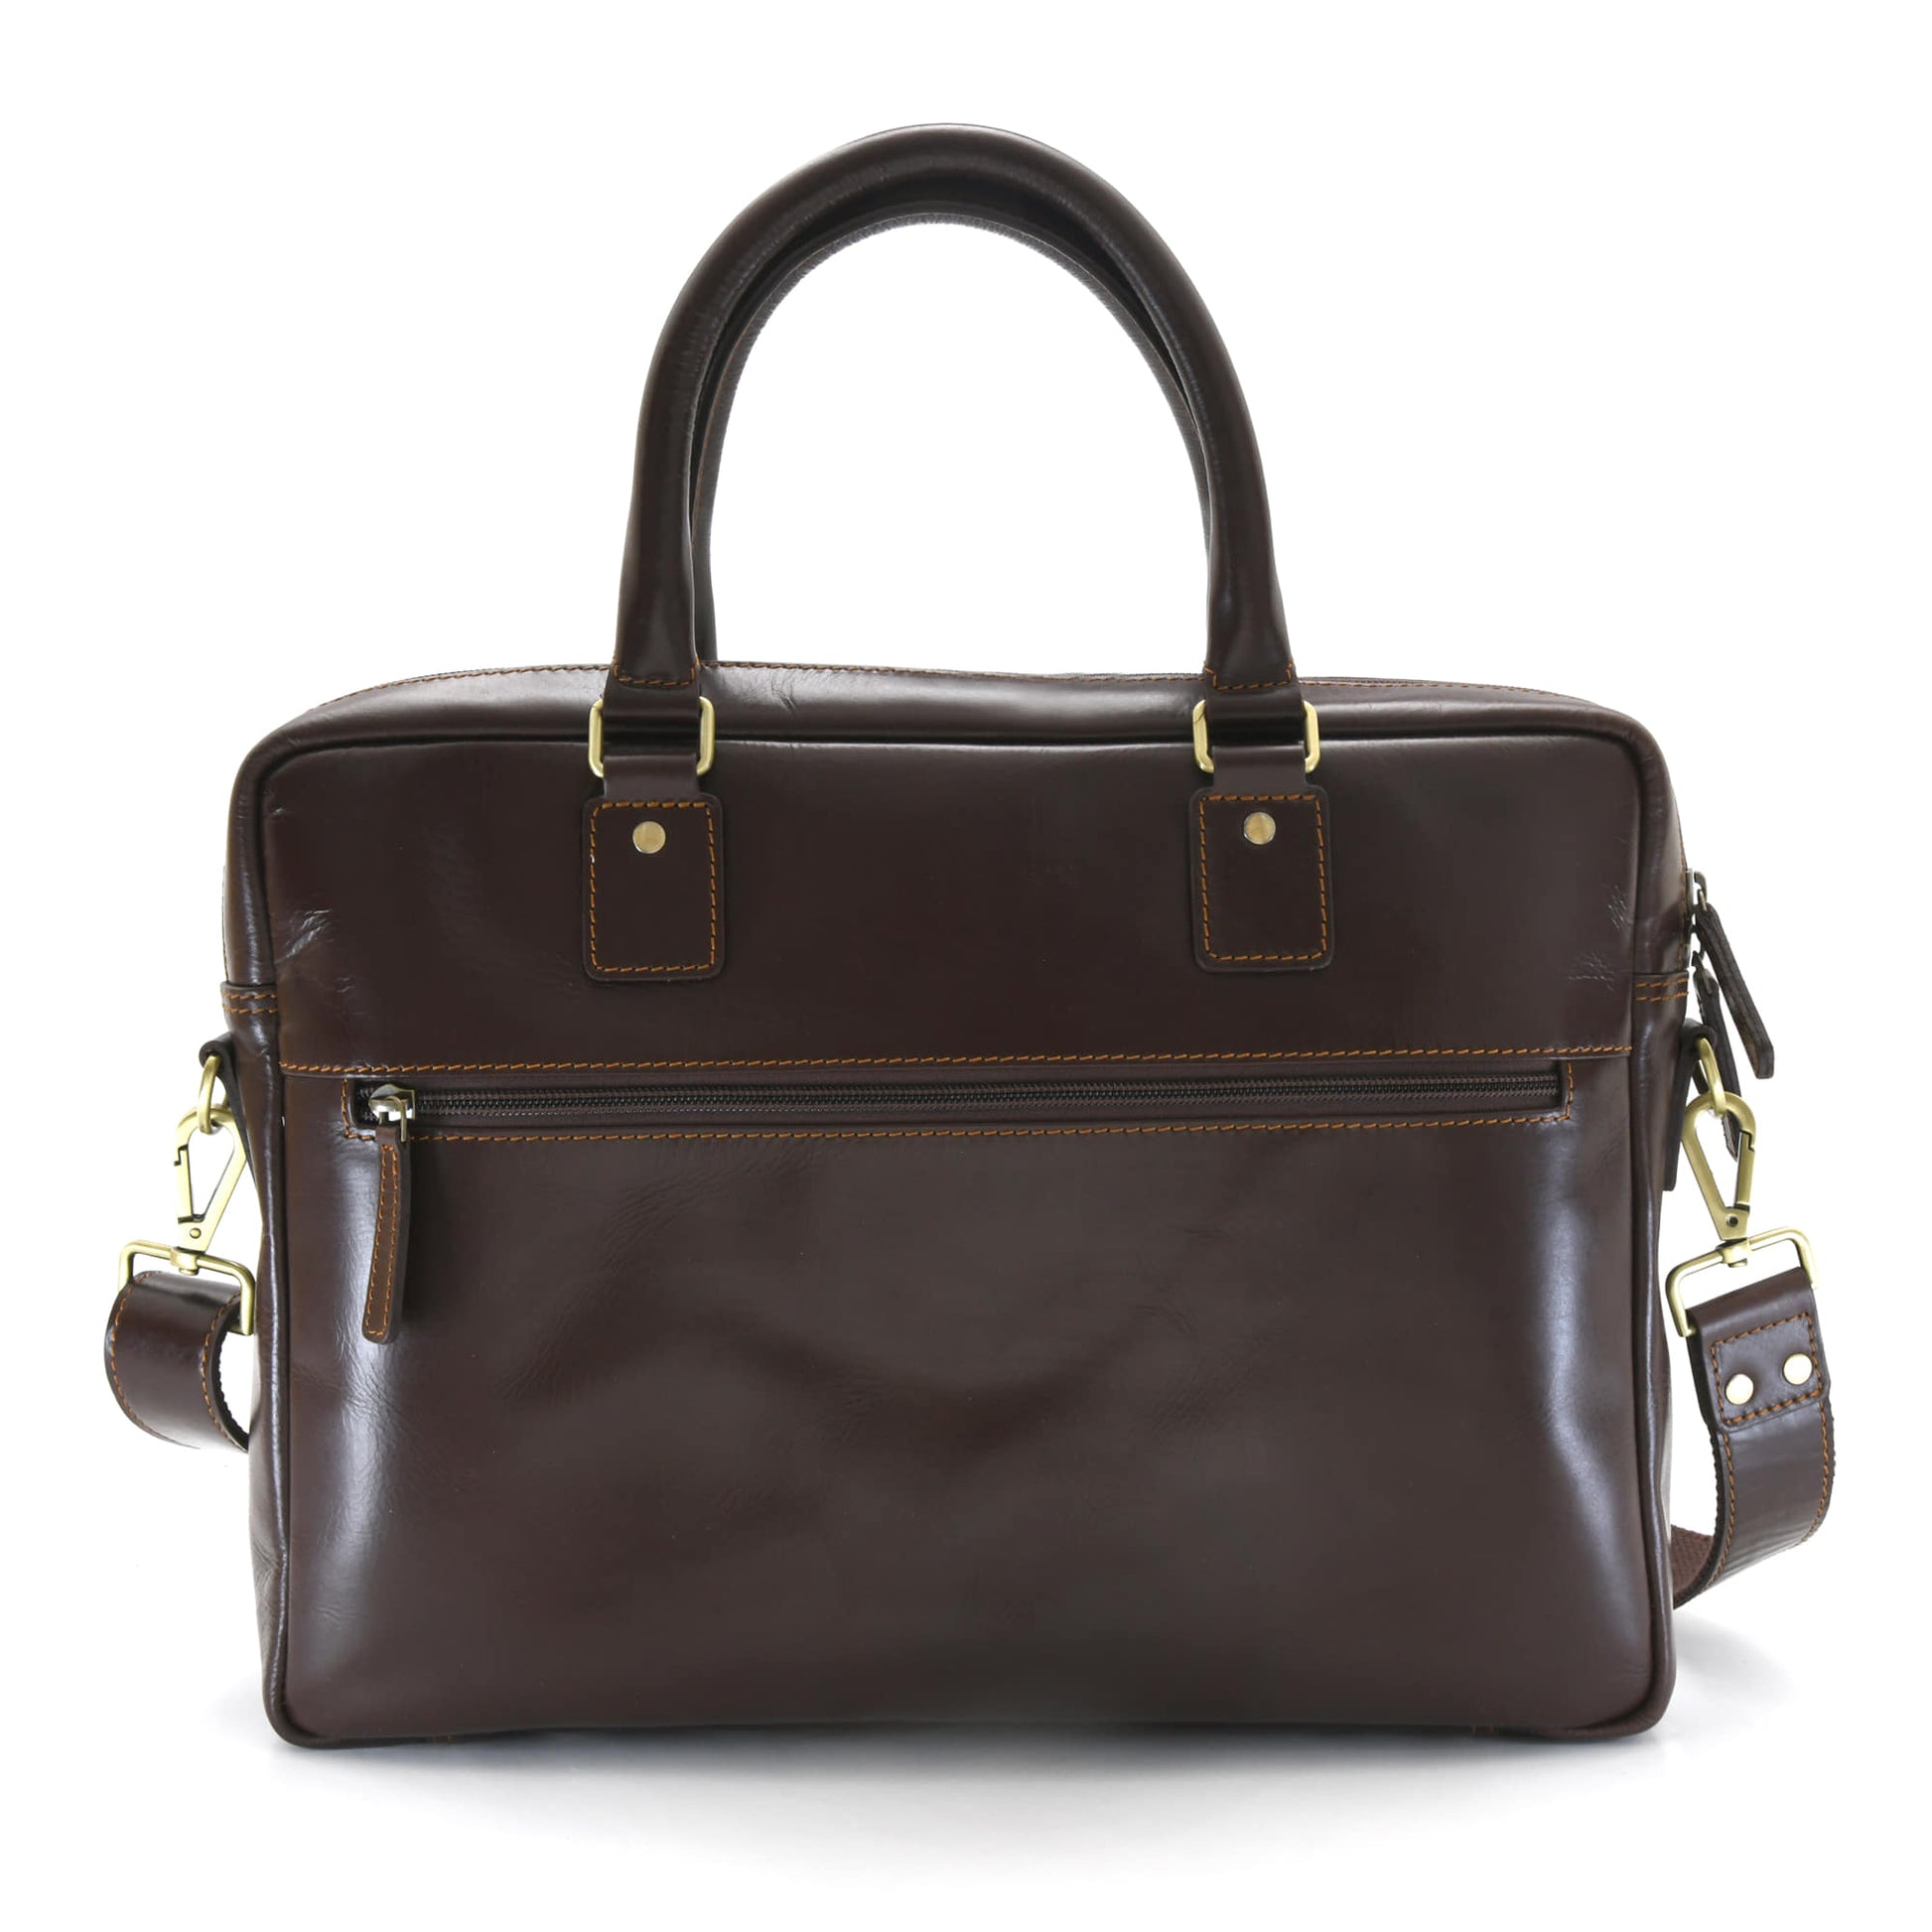 Style n Craft 392009 Men's Portfolio Briefcase Bag in Full Grain Dark Brown Leather - Back View showing the External Zippered Pocket